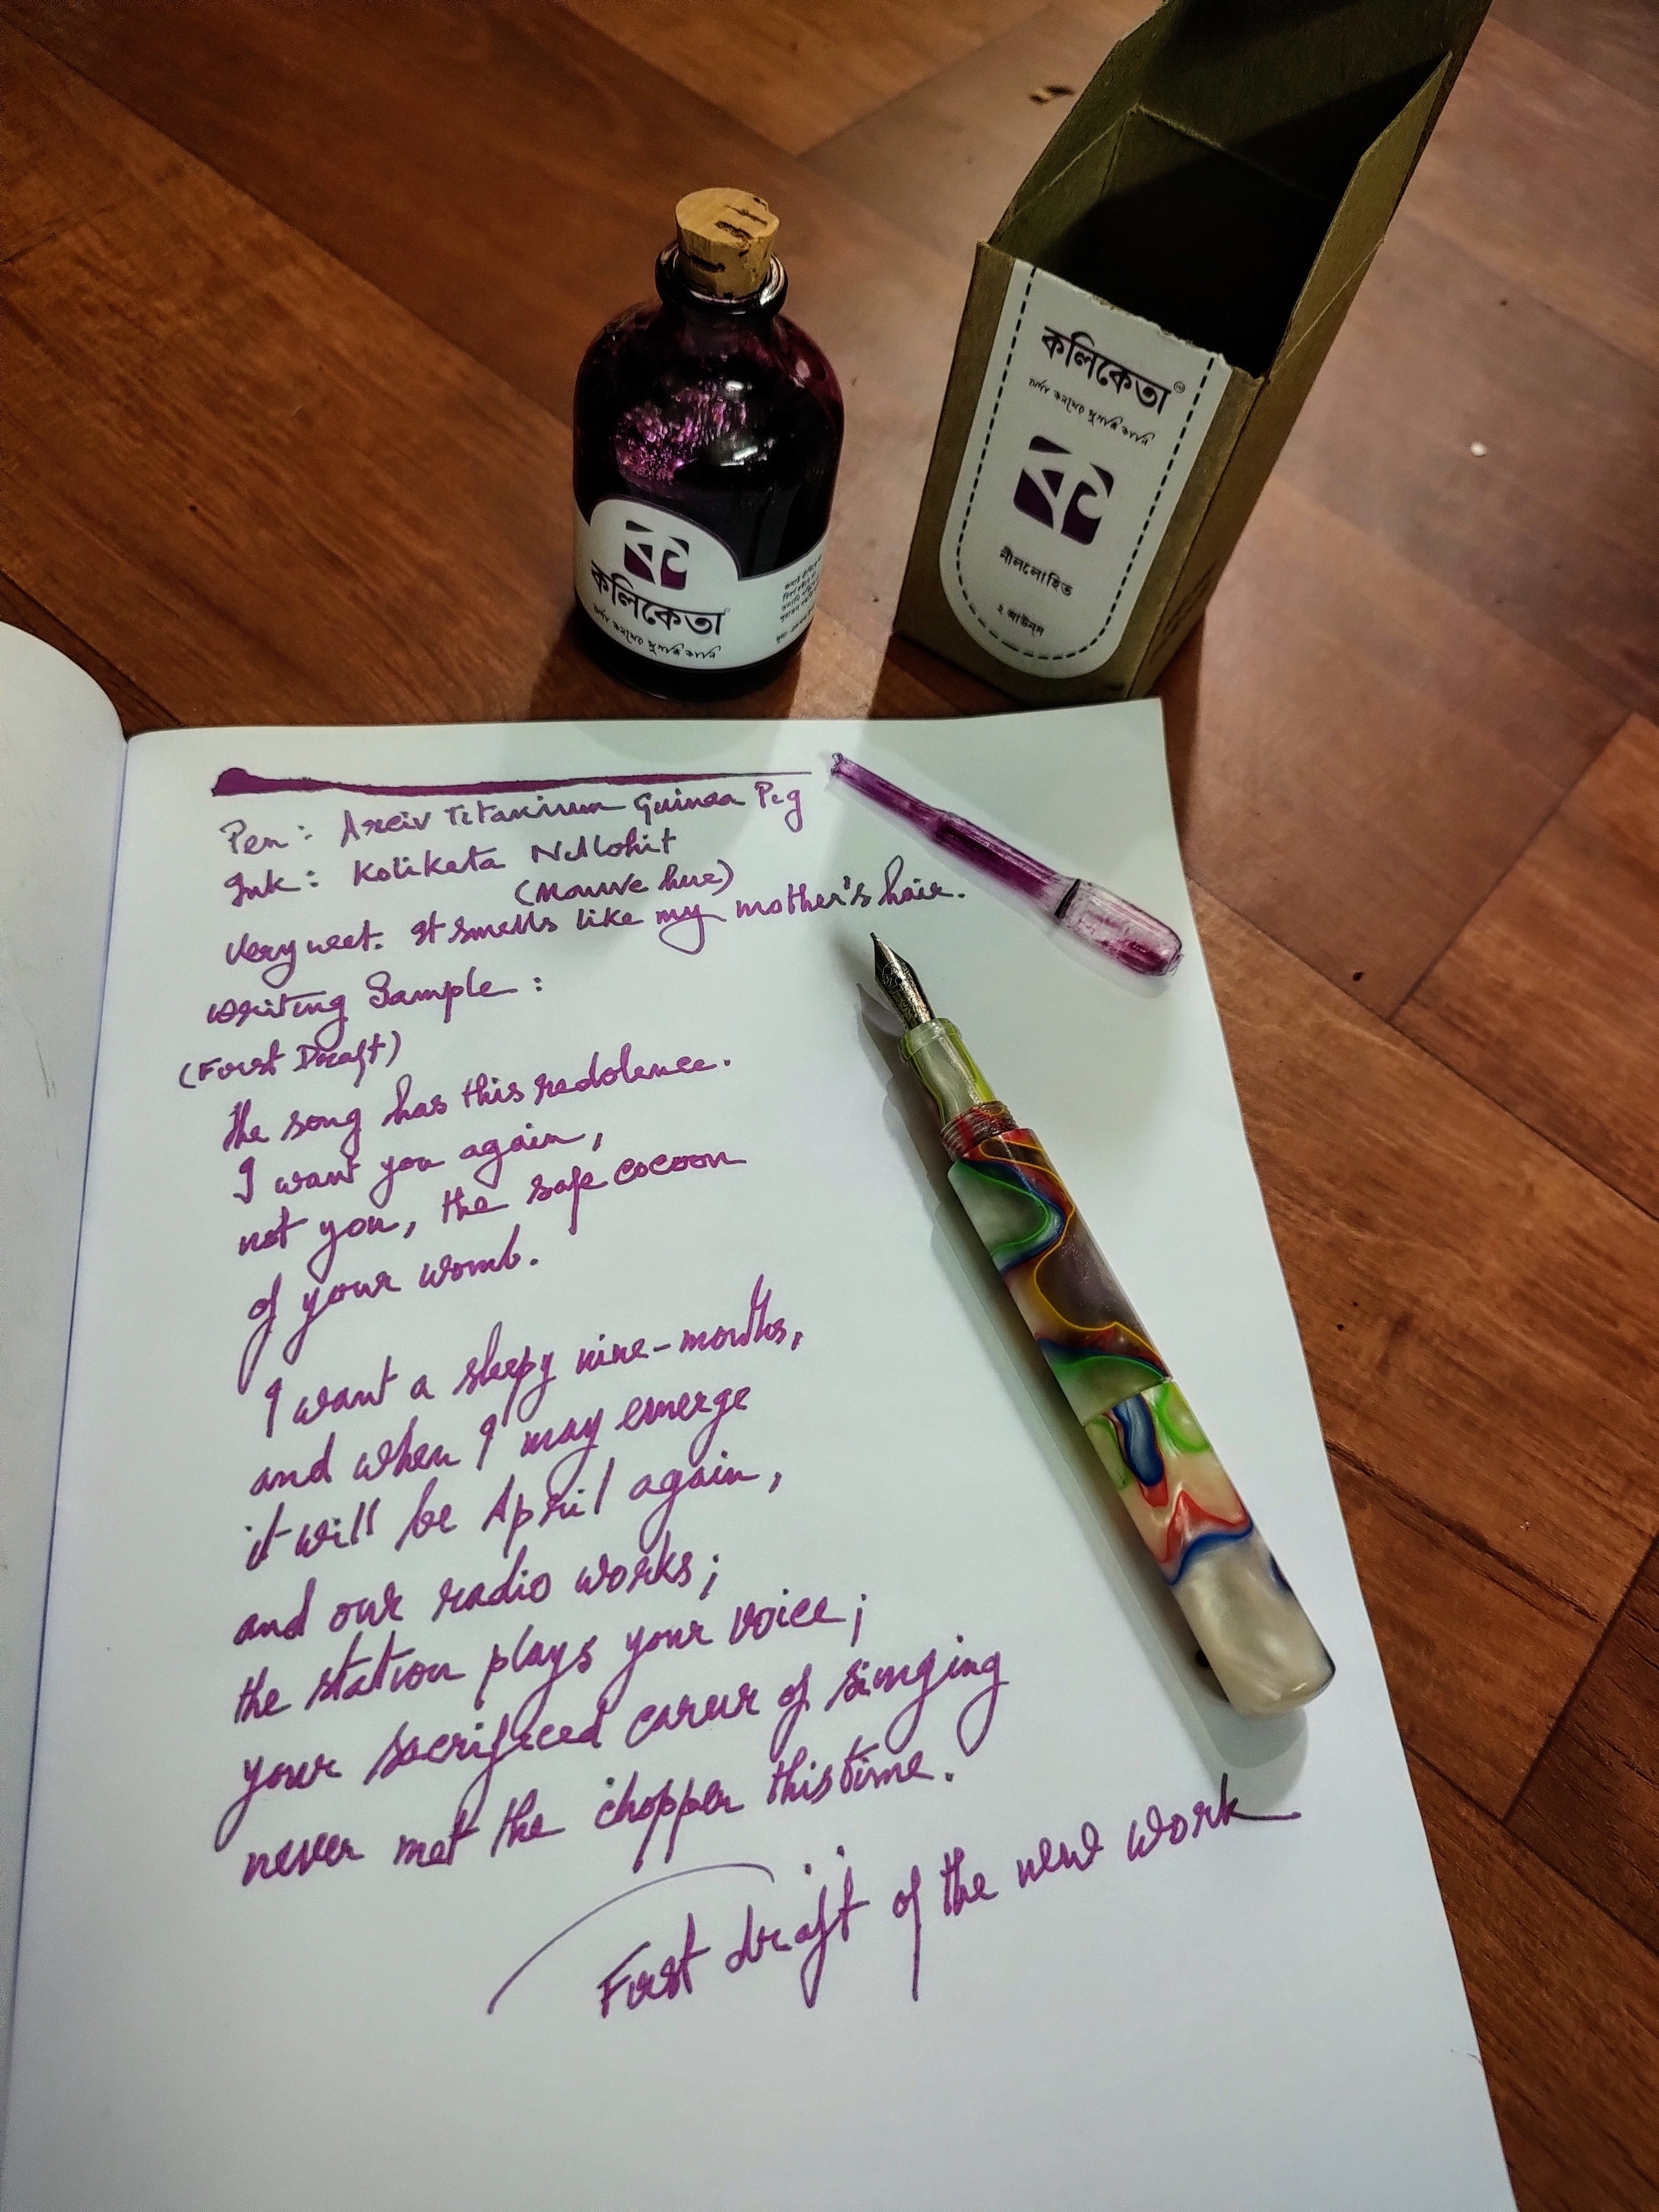 “A Bottle of Scented Ink” by Kushal Poddar